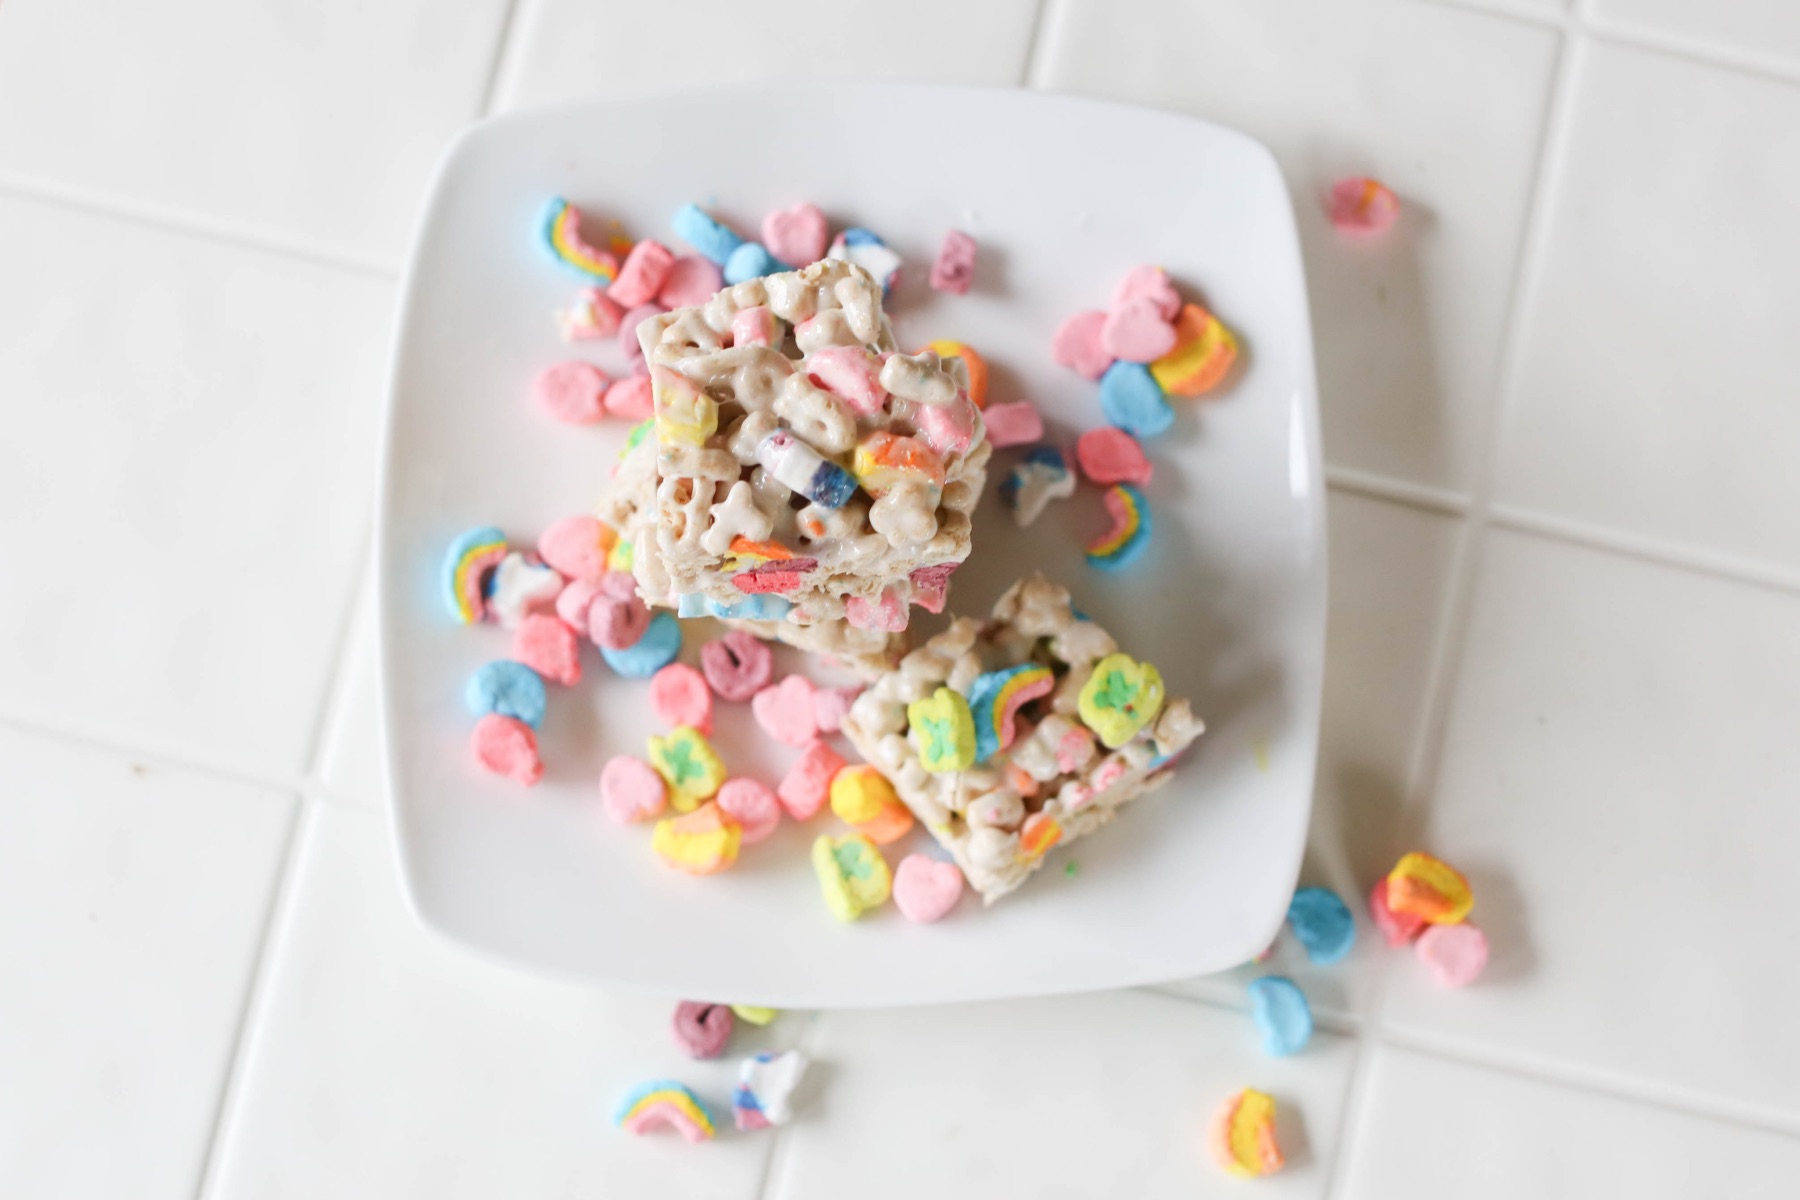 finished marshmallow treats with lucky charms